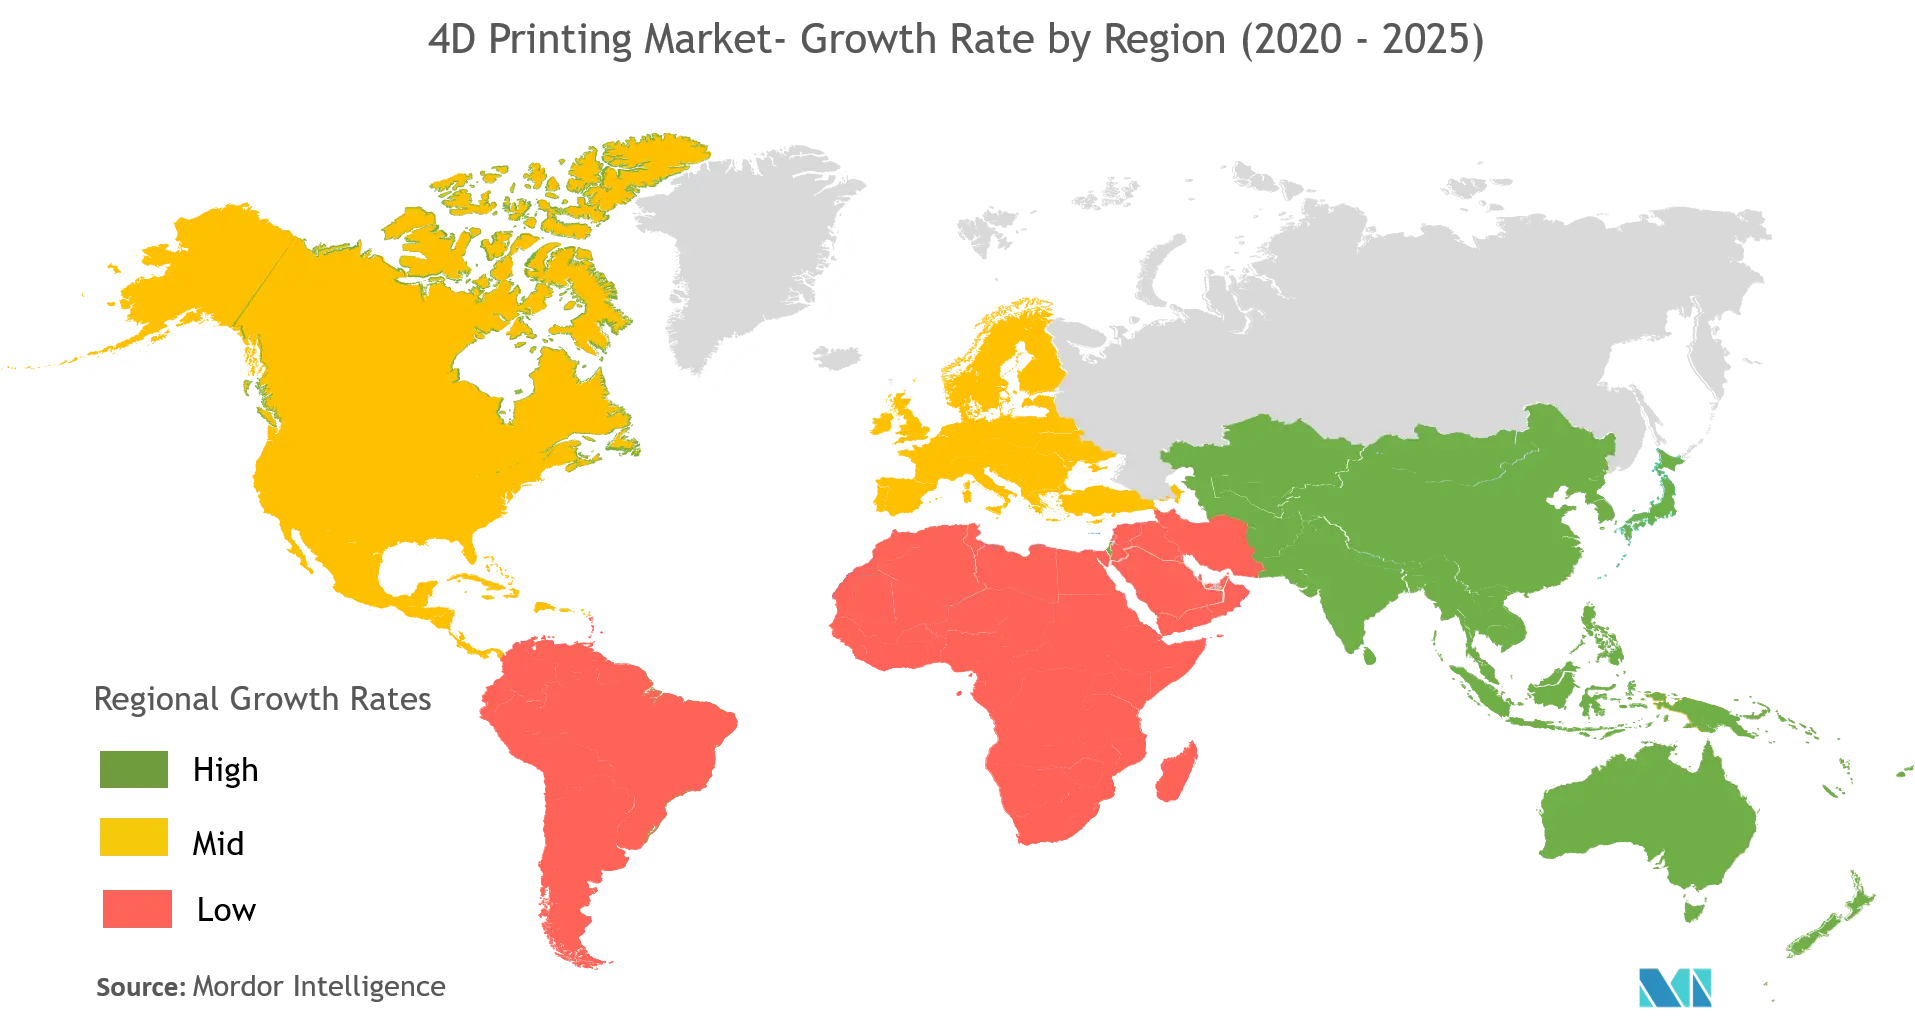 4D Printing Market - Growth Rate by Region ( 2020 - 2025 )